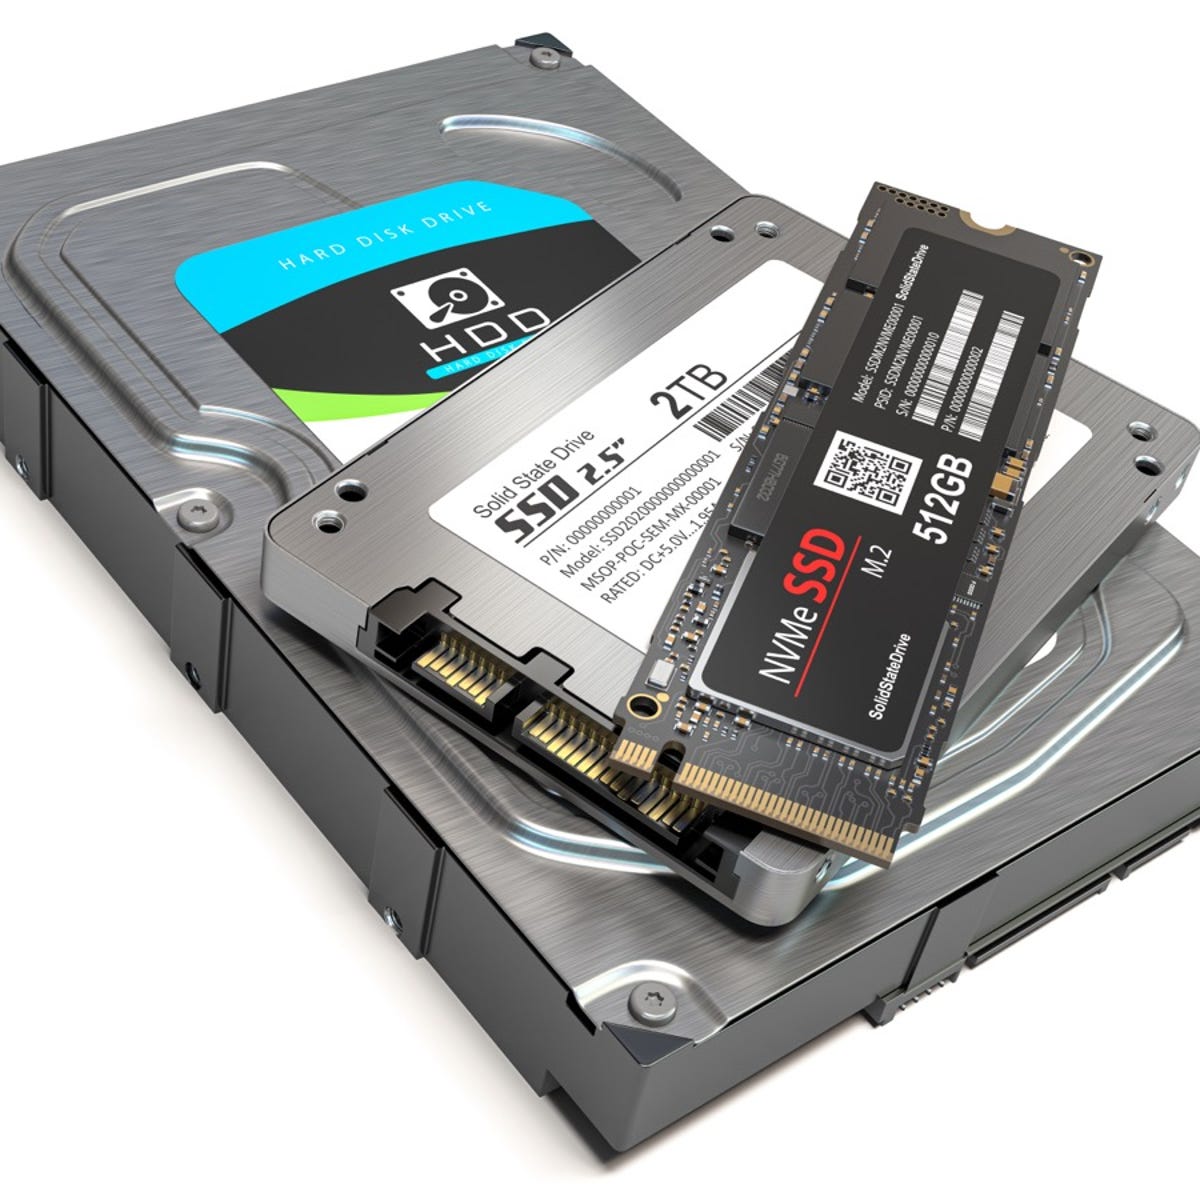 Eerder Vaak gesproken beloning SSD vs HDD: What's the difference, and which should you buy? | ZDNET